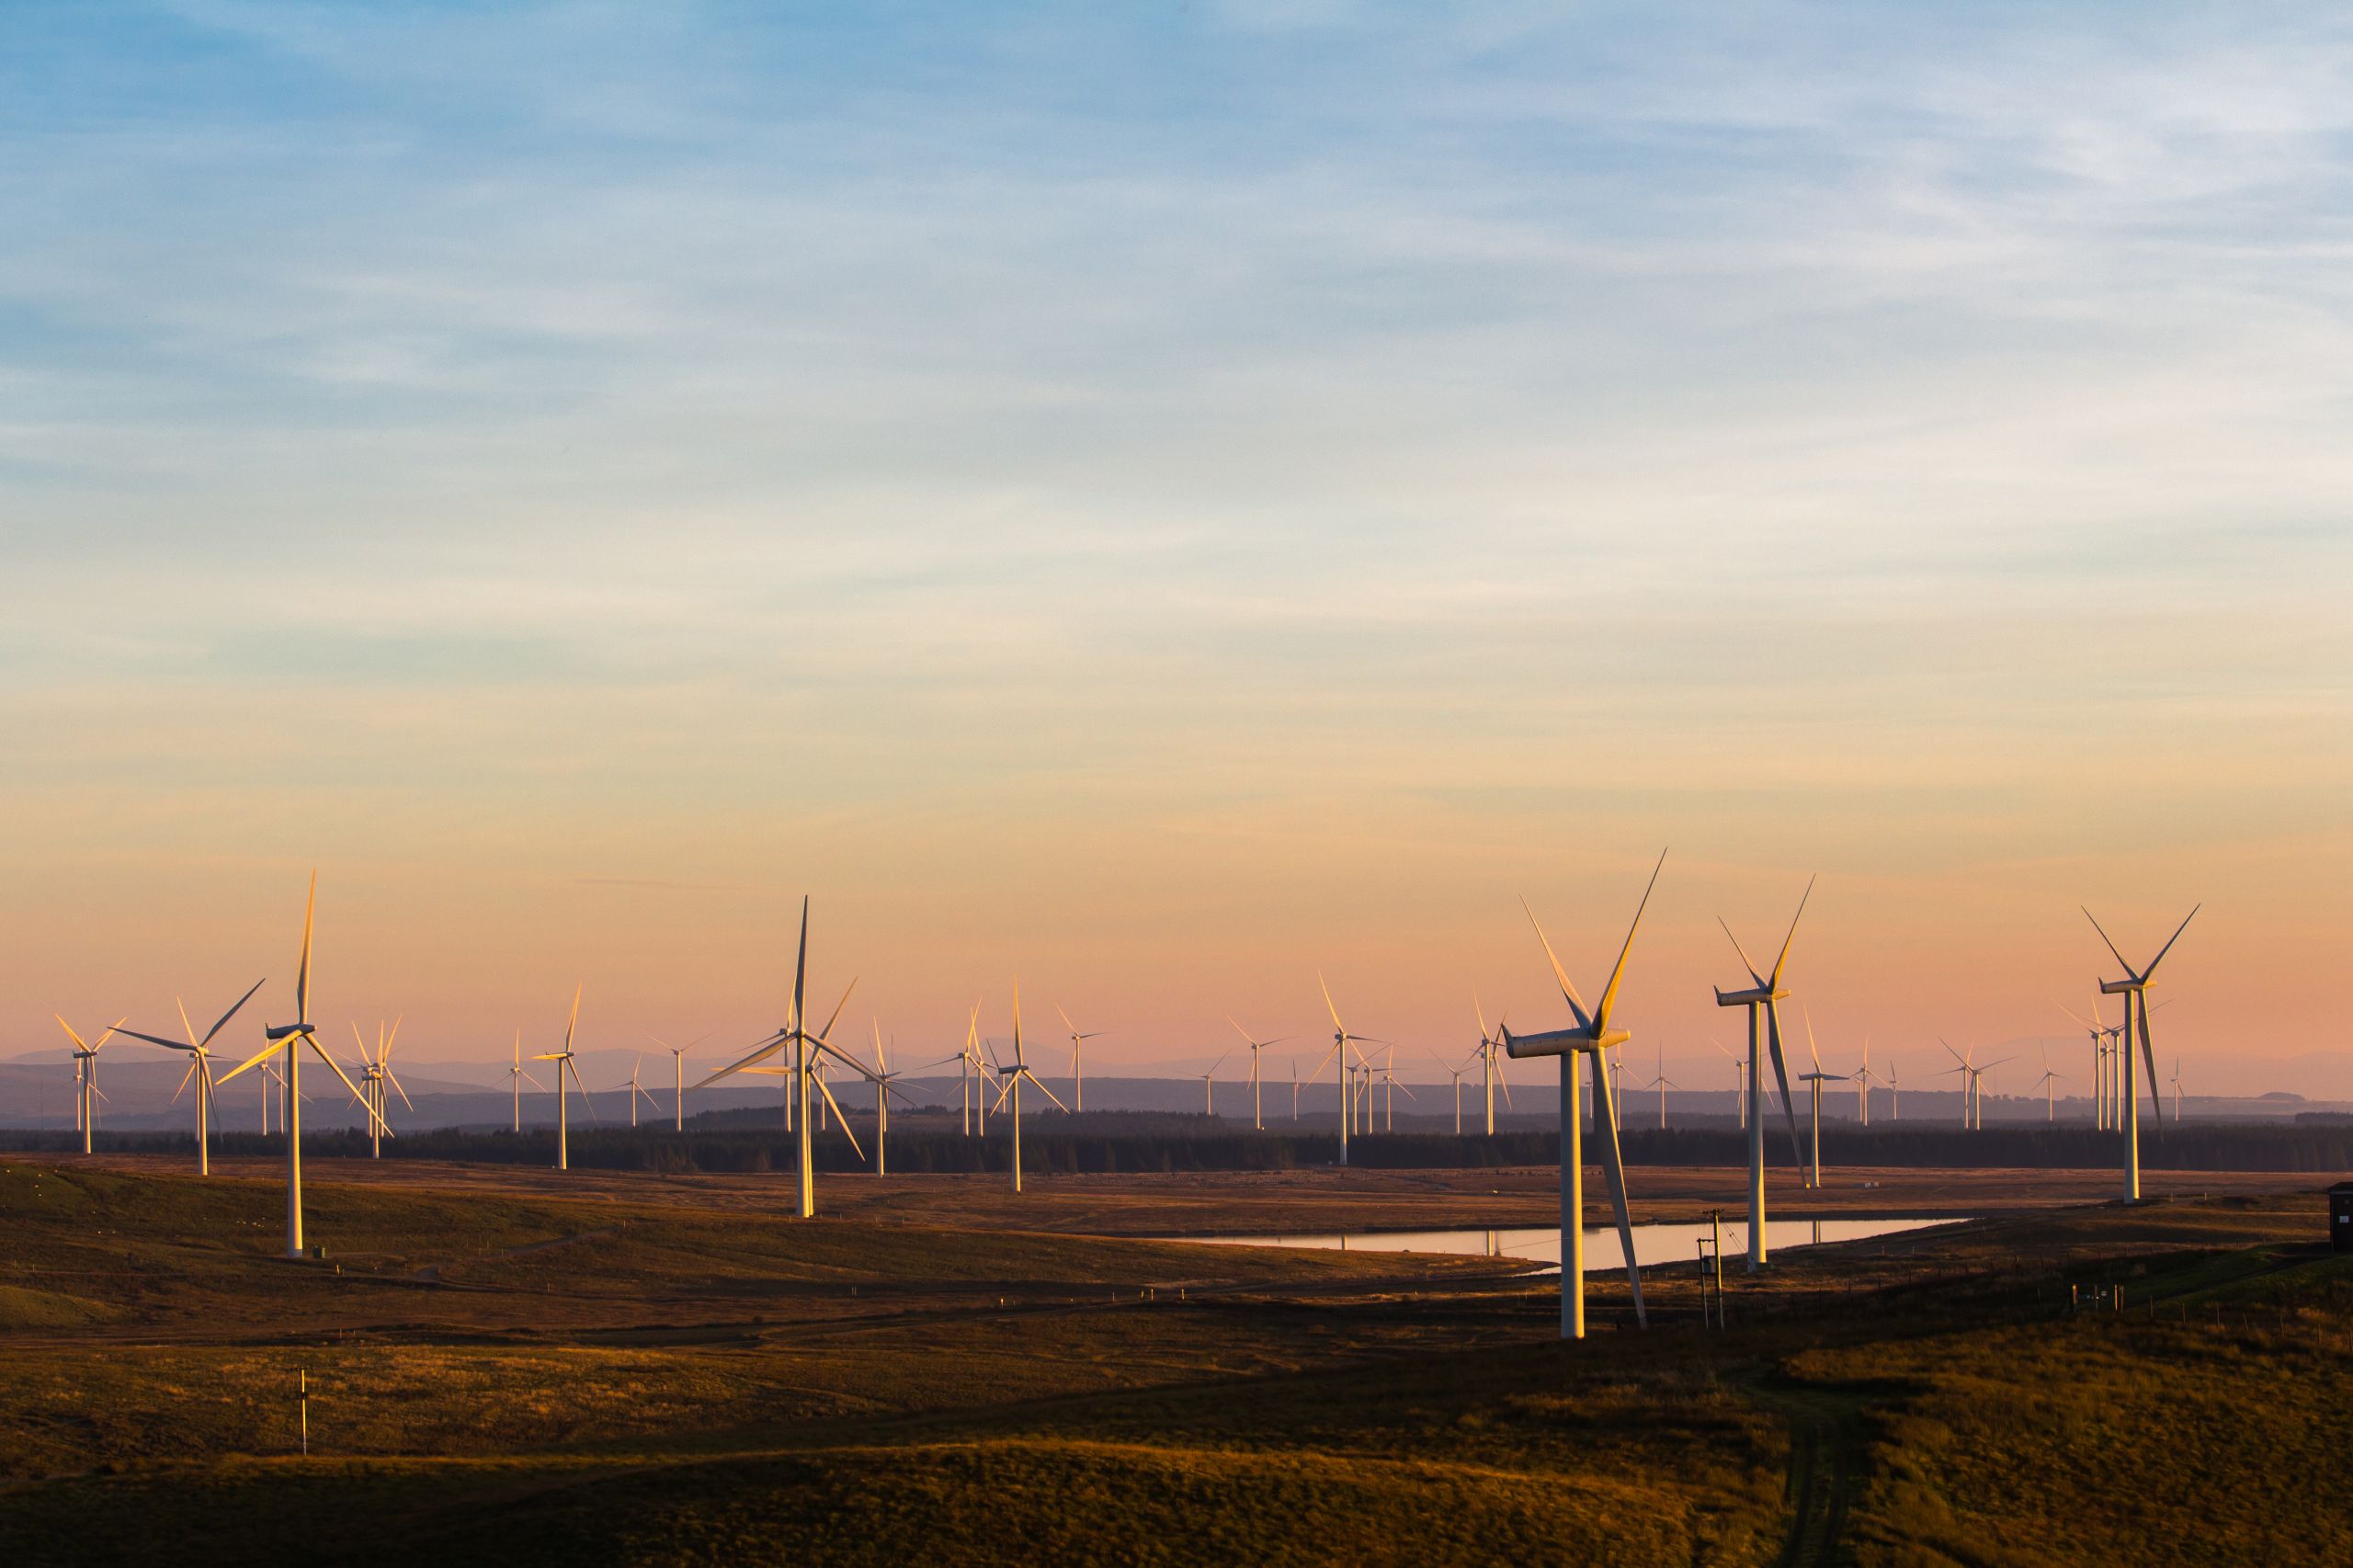 Landscape of a windfarm during a sunset